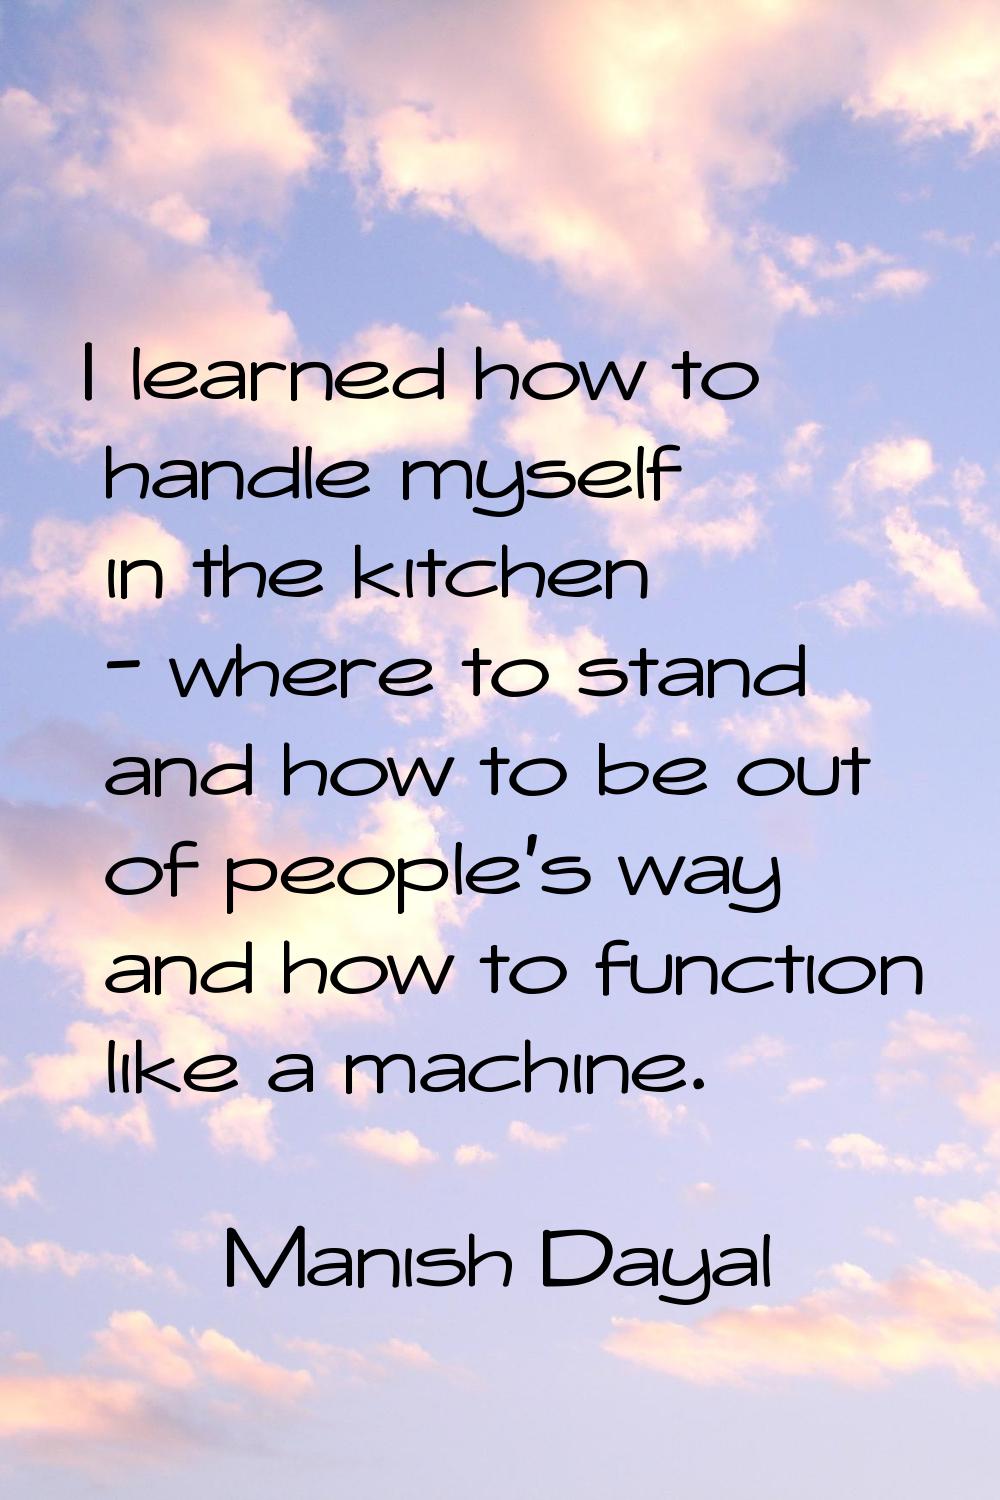 I learned how to handle myself in the kitchen - where to stand and how to be out of people's way an